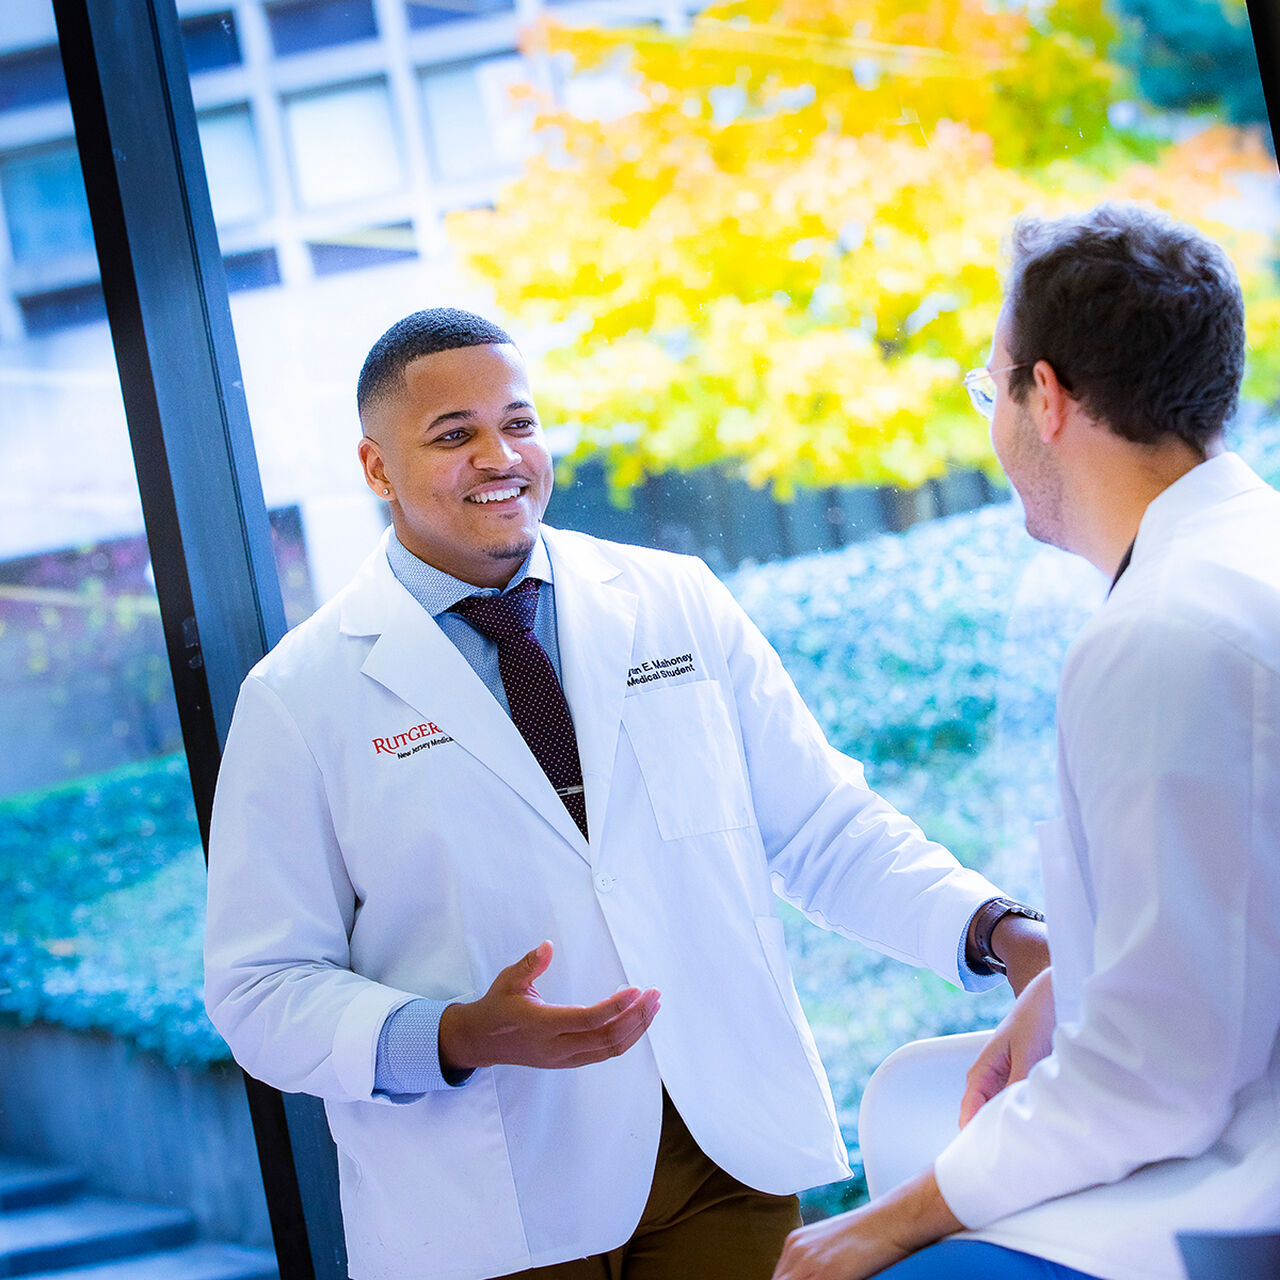 New Jersey Medical School student chatting with a colleague in a medical facility image number 0